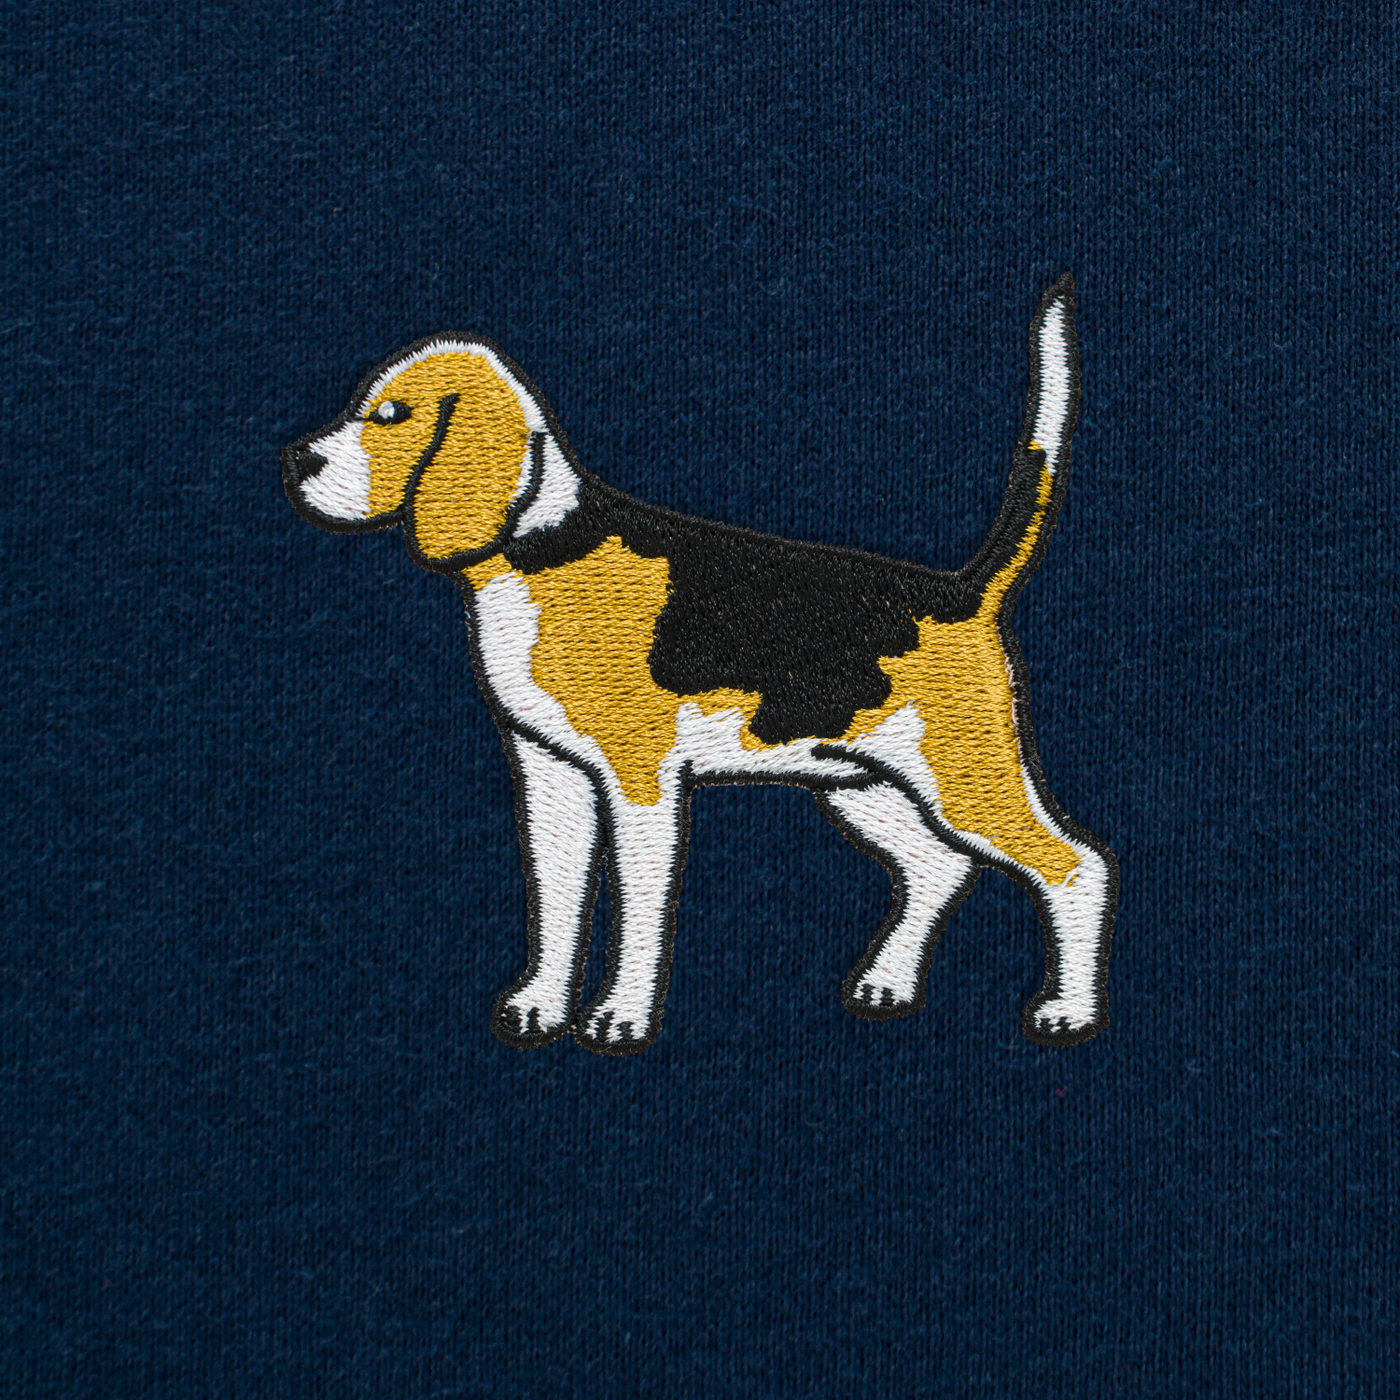 Bobby's Planet Men's Embroidered Beagle T-Shirt from Paws Dog Cat Animals Collection in Navy Color#color_navy